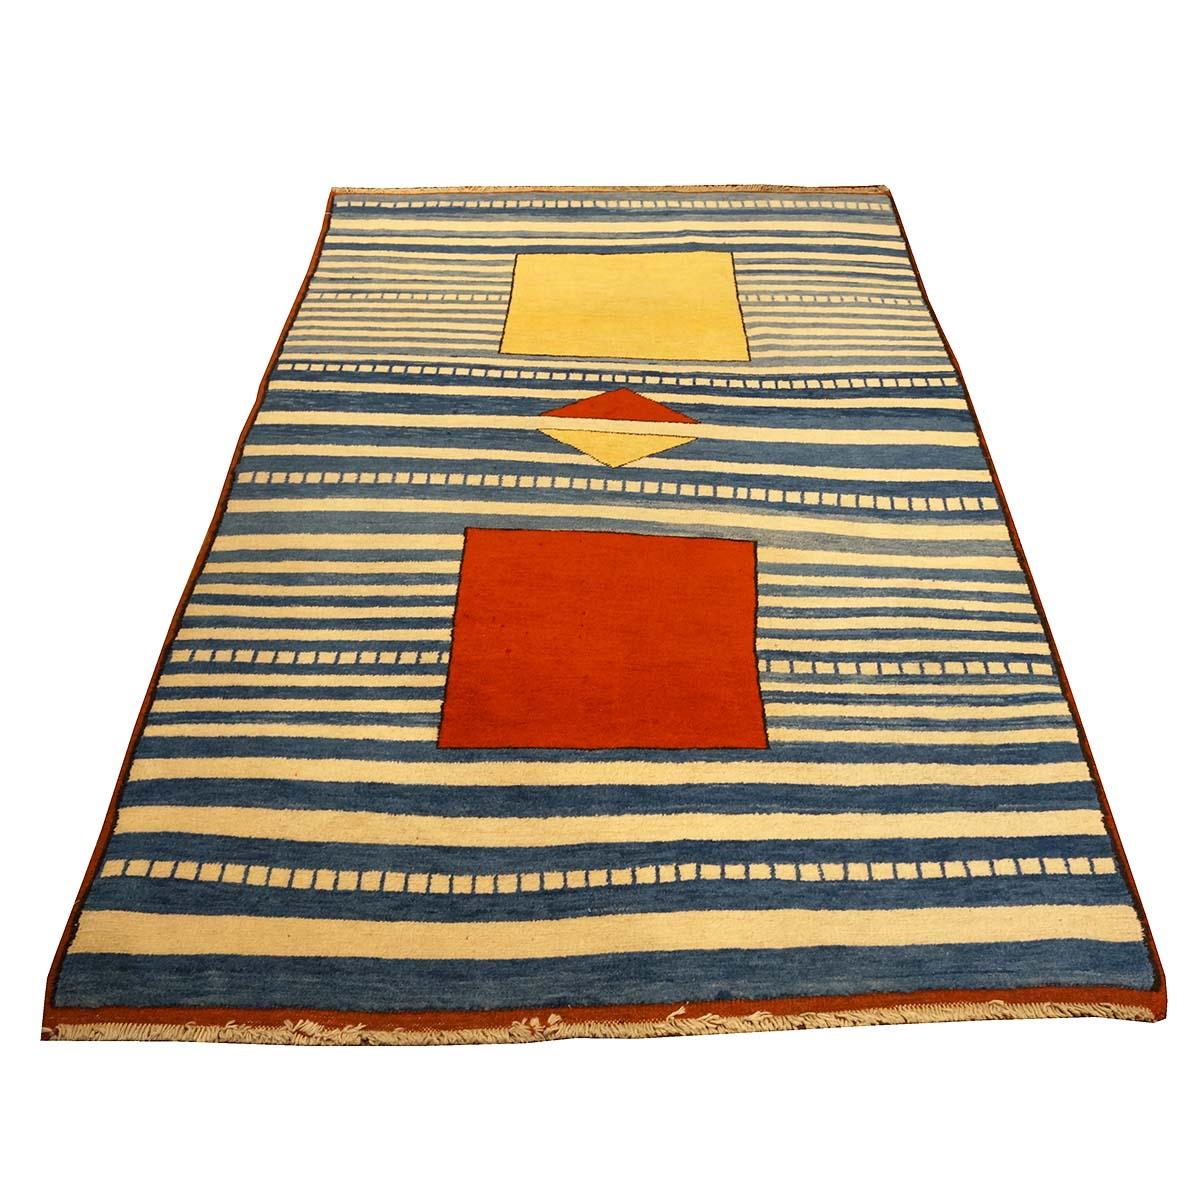 Ashly fine rugs presents a 21st-century Turkish Gabbeh 4x7 blue & ivory handmade Area rug. Gabbeh rugs were originally made by women from Qashgai tribes of south-western Persia and are known for their simple design, strong colors, and very thick and